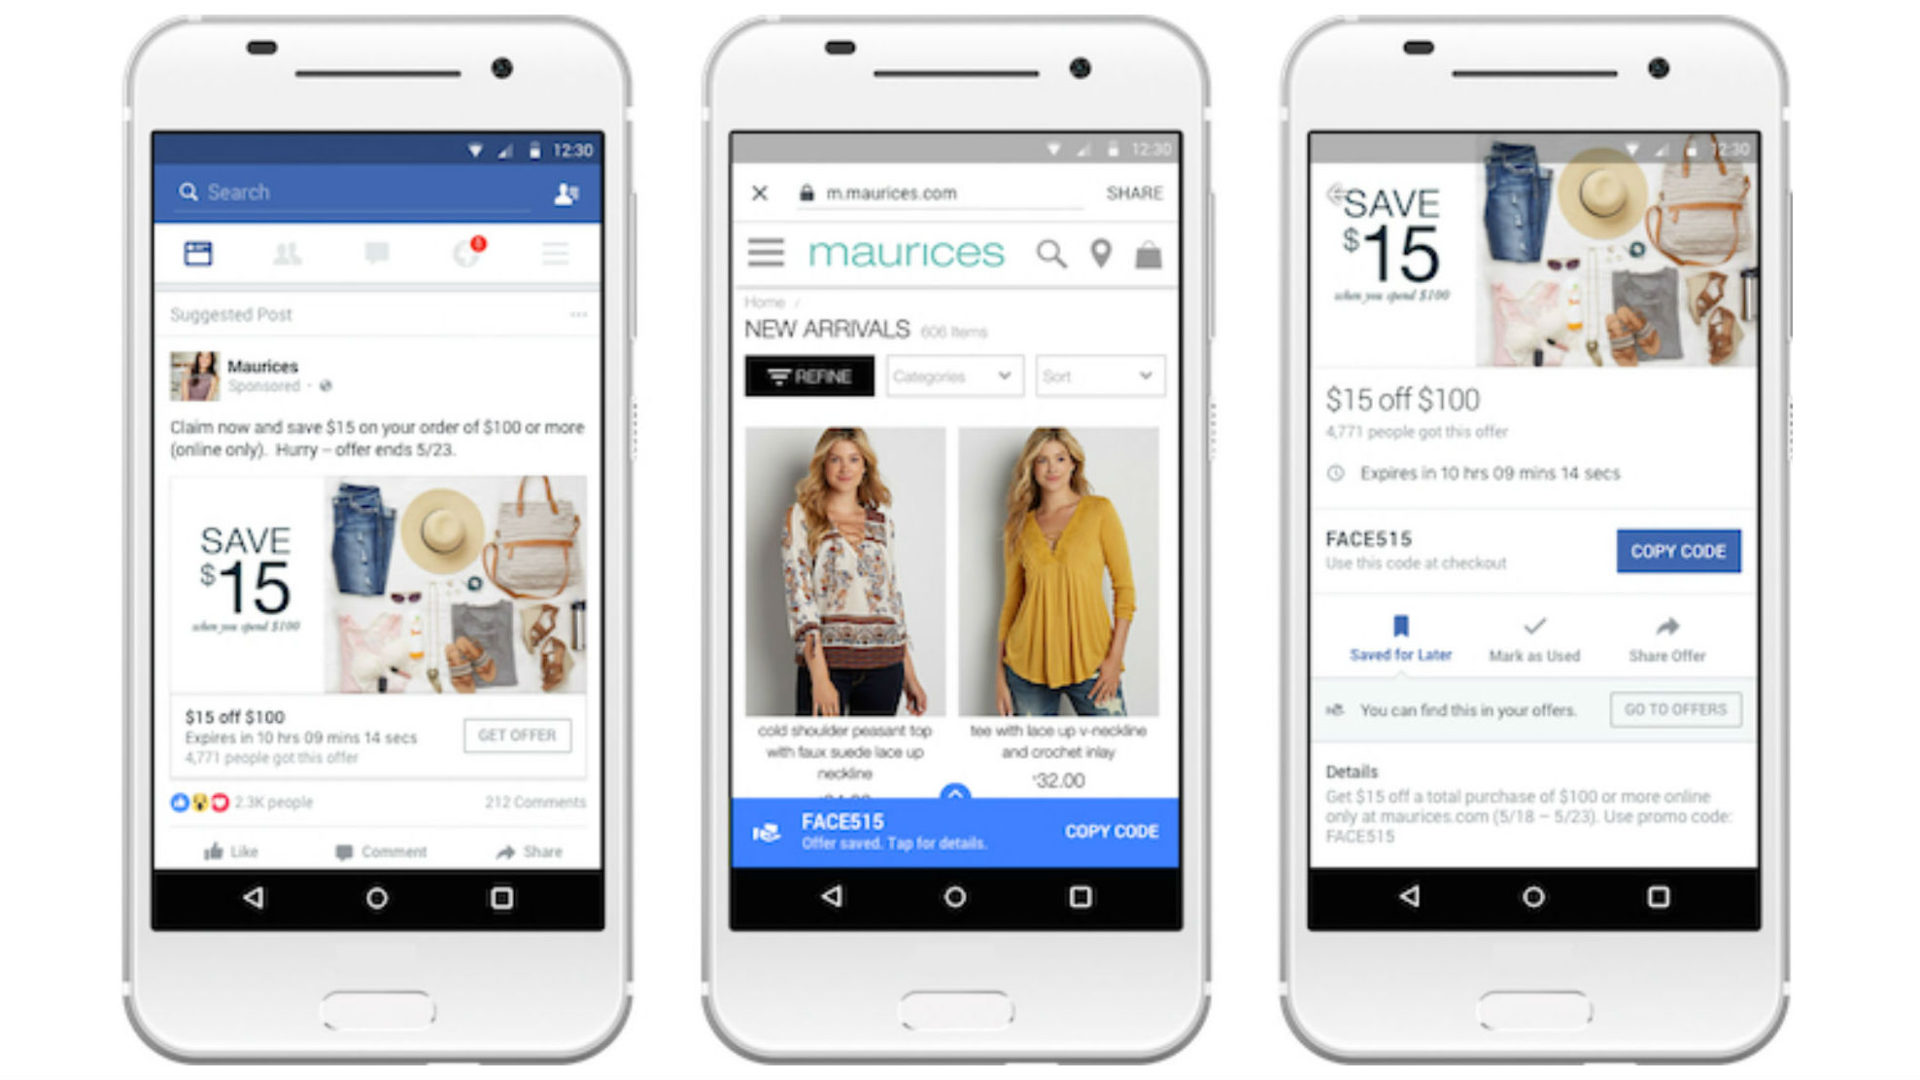 Facebook will now show offer codes while on a brand's site and save them to a new Offers tab.